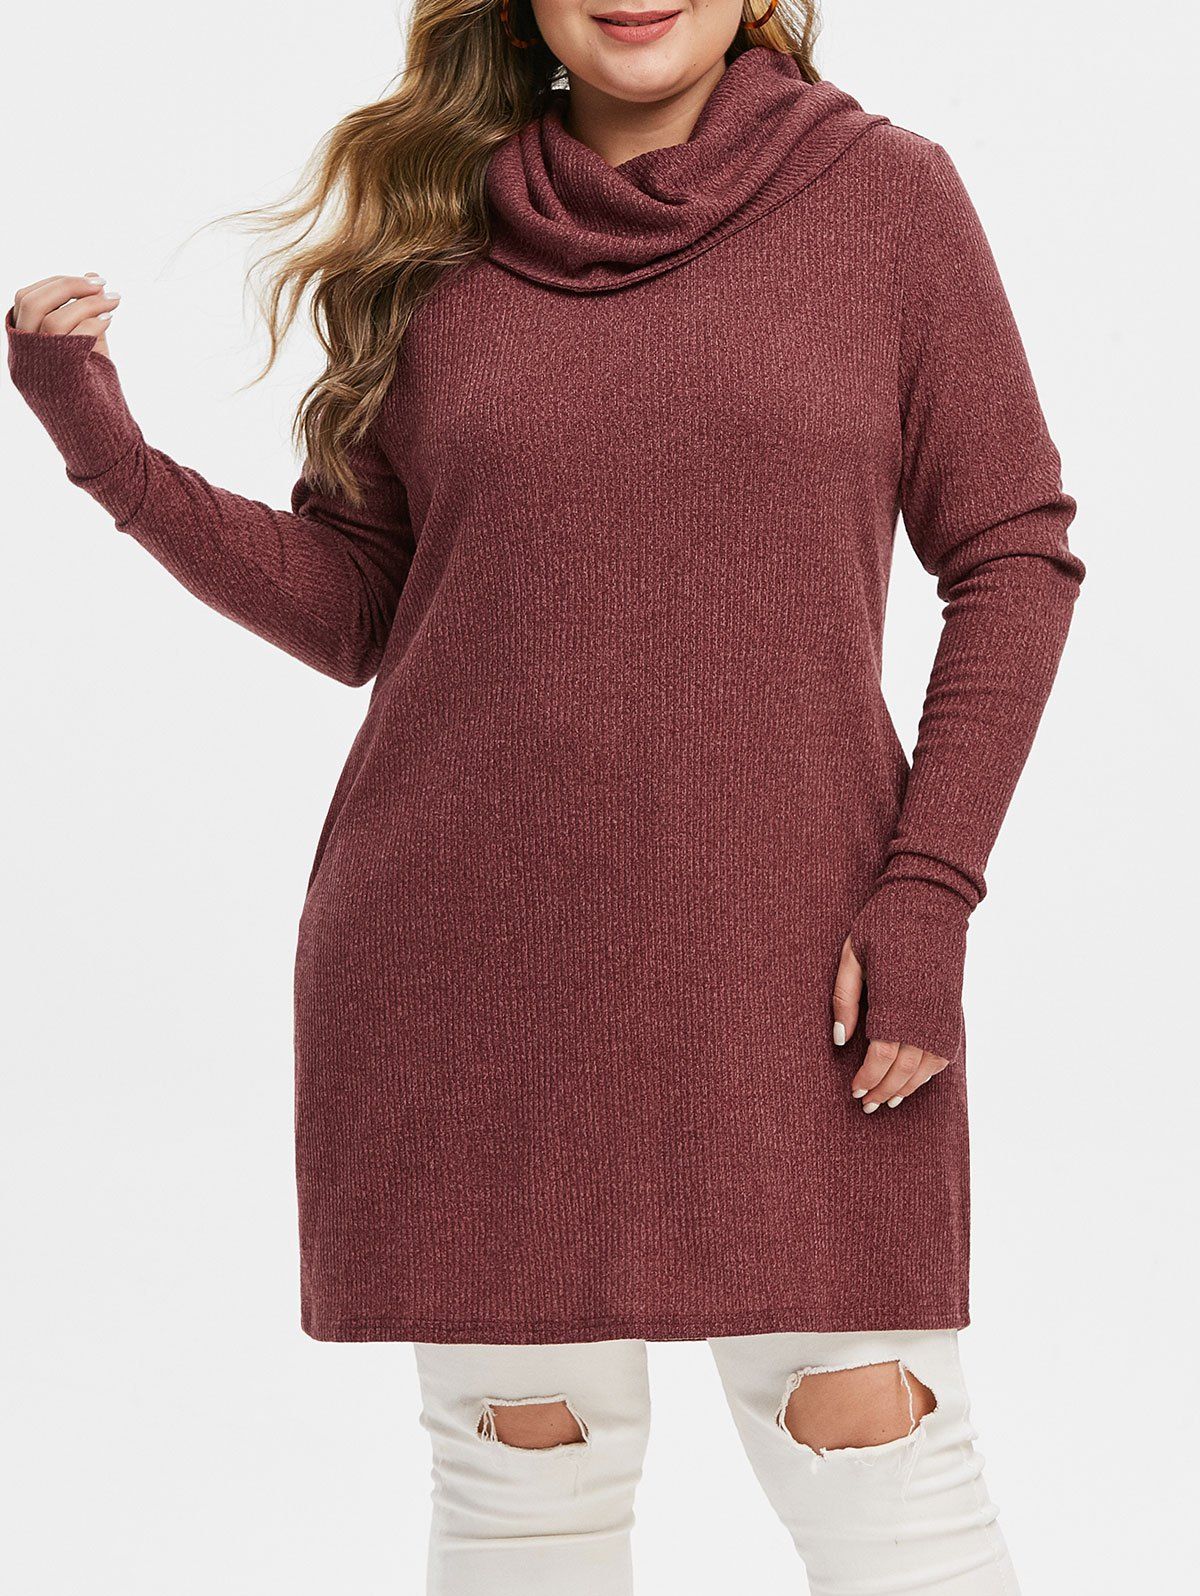 Plus Size Solid Turtleneck Tunic Sweater - RED WINE 1X